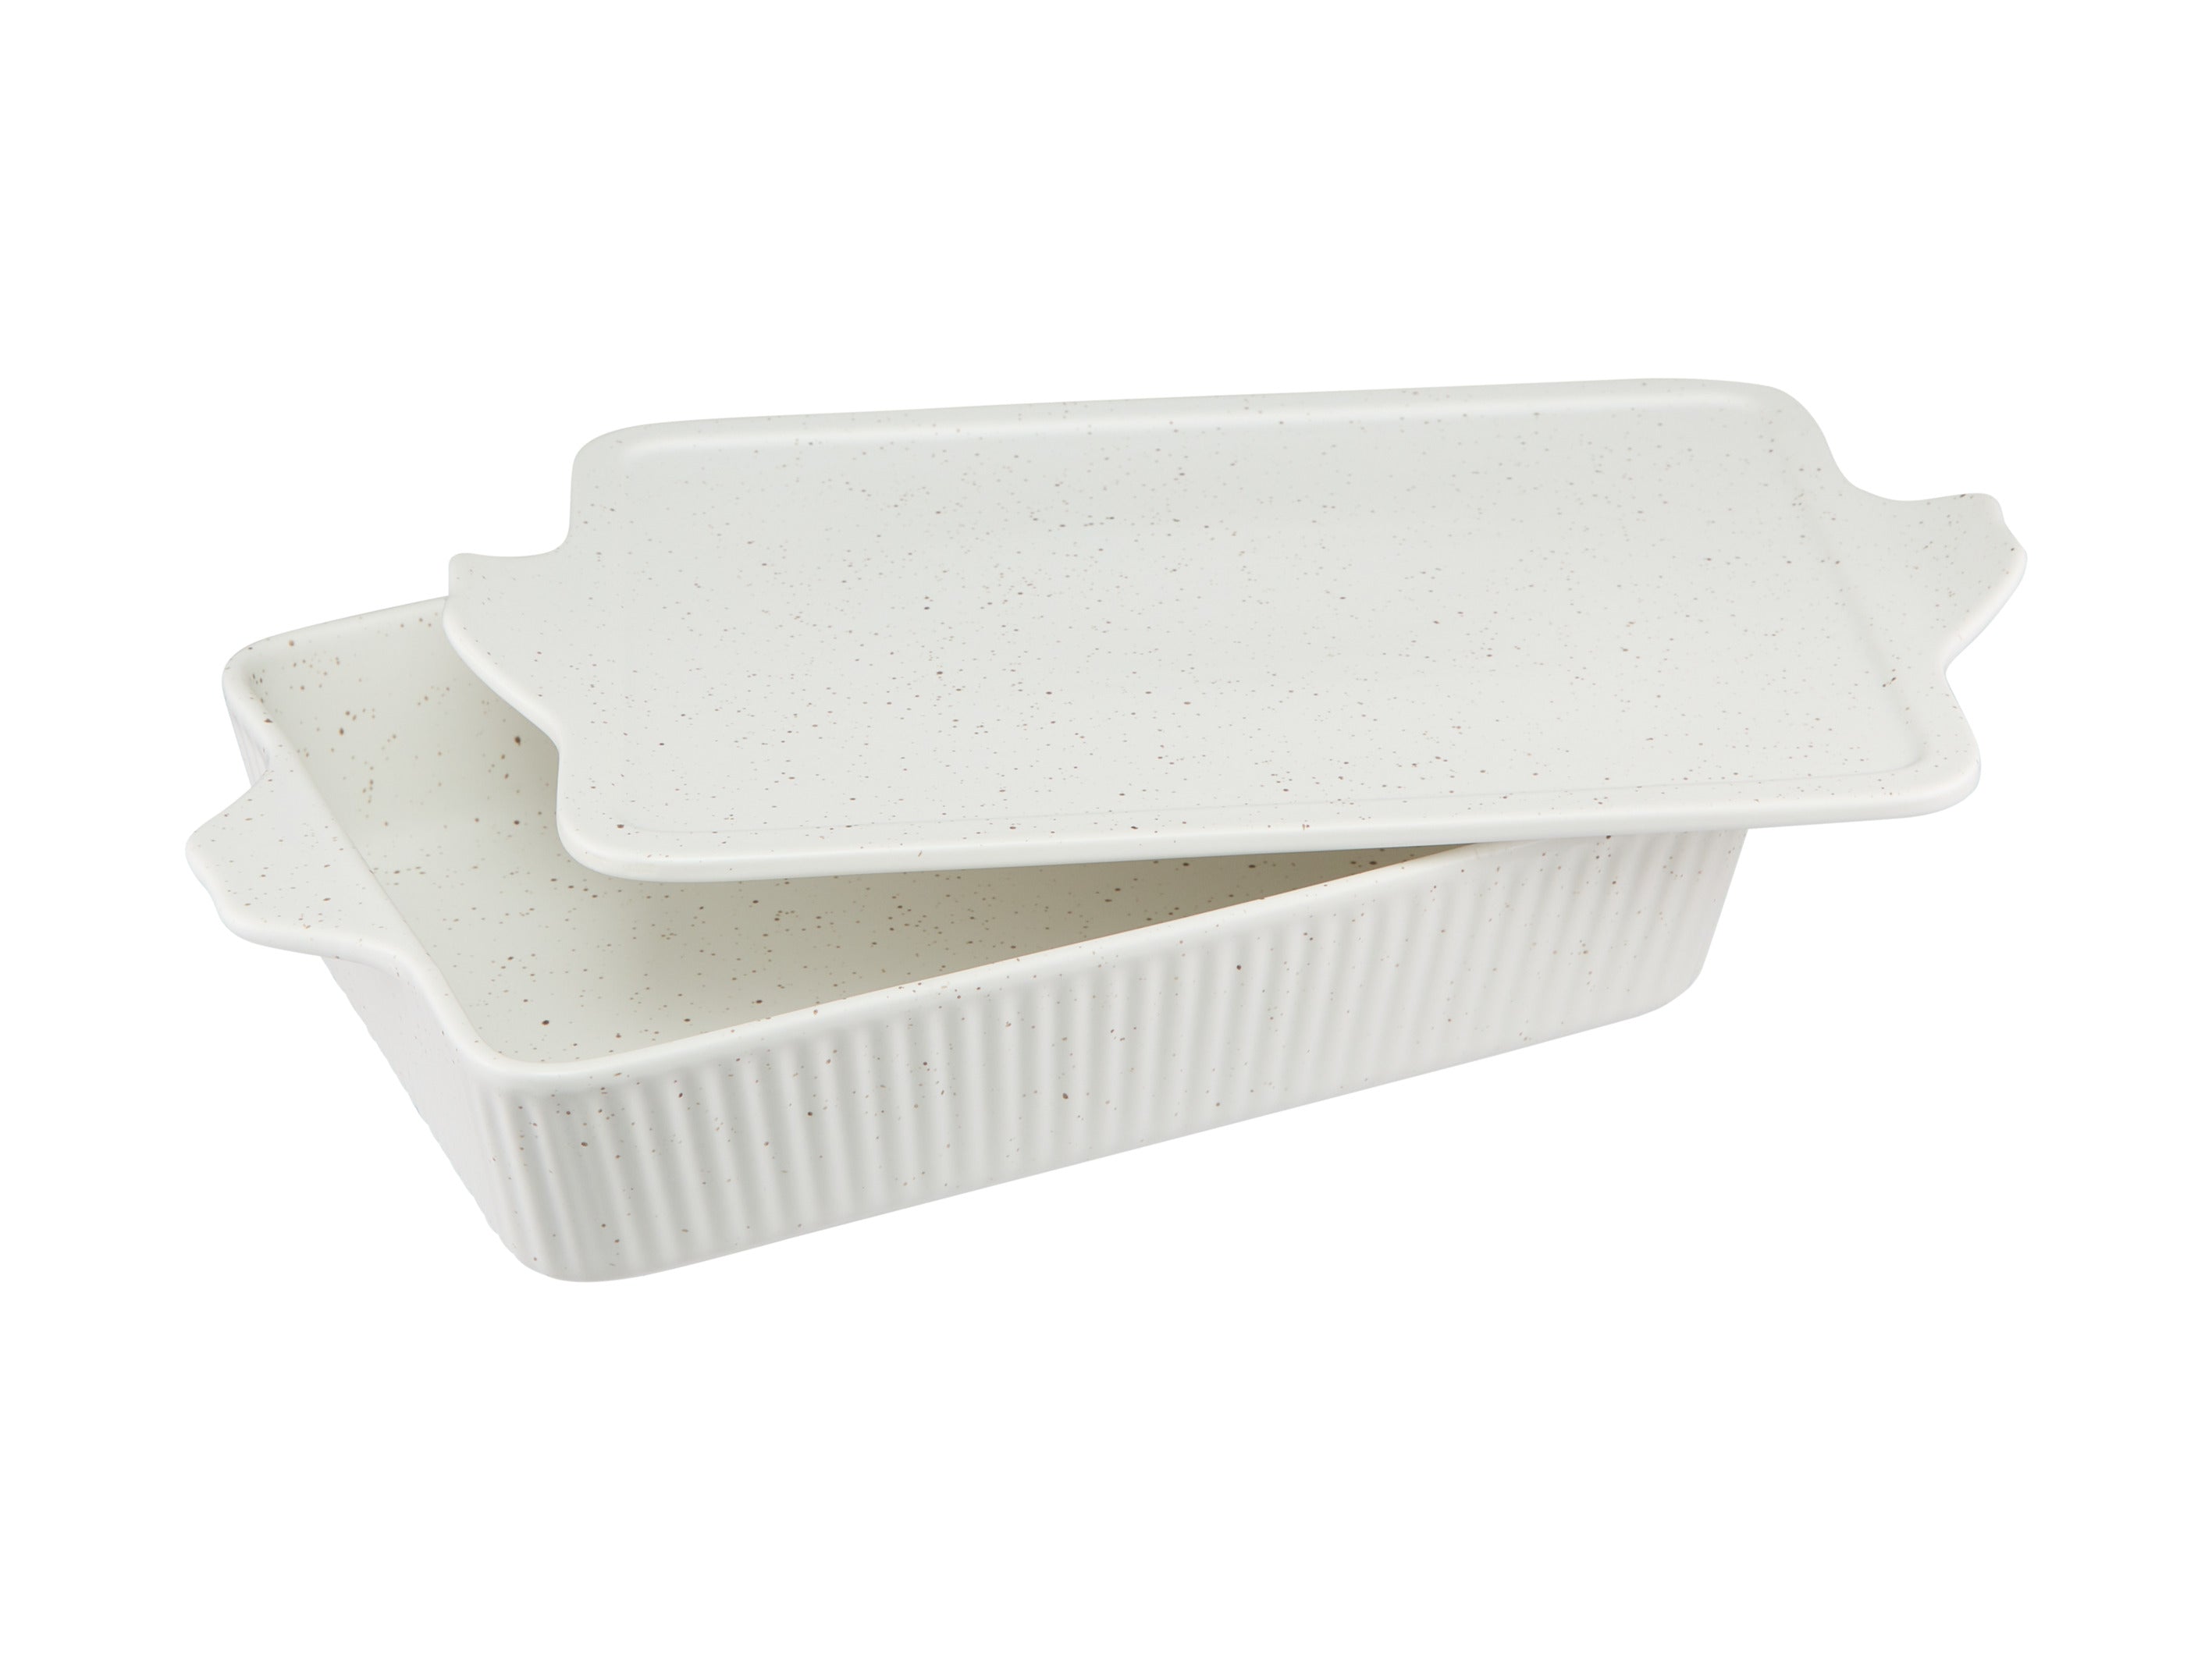 Maxwell & Williams Speckle Rectangular Baker With Tray 33x23cm - Cream